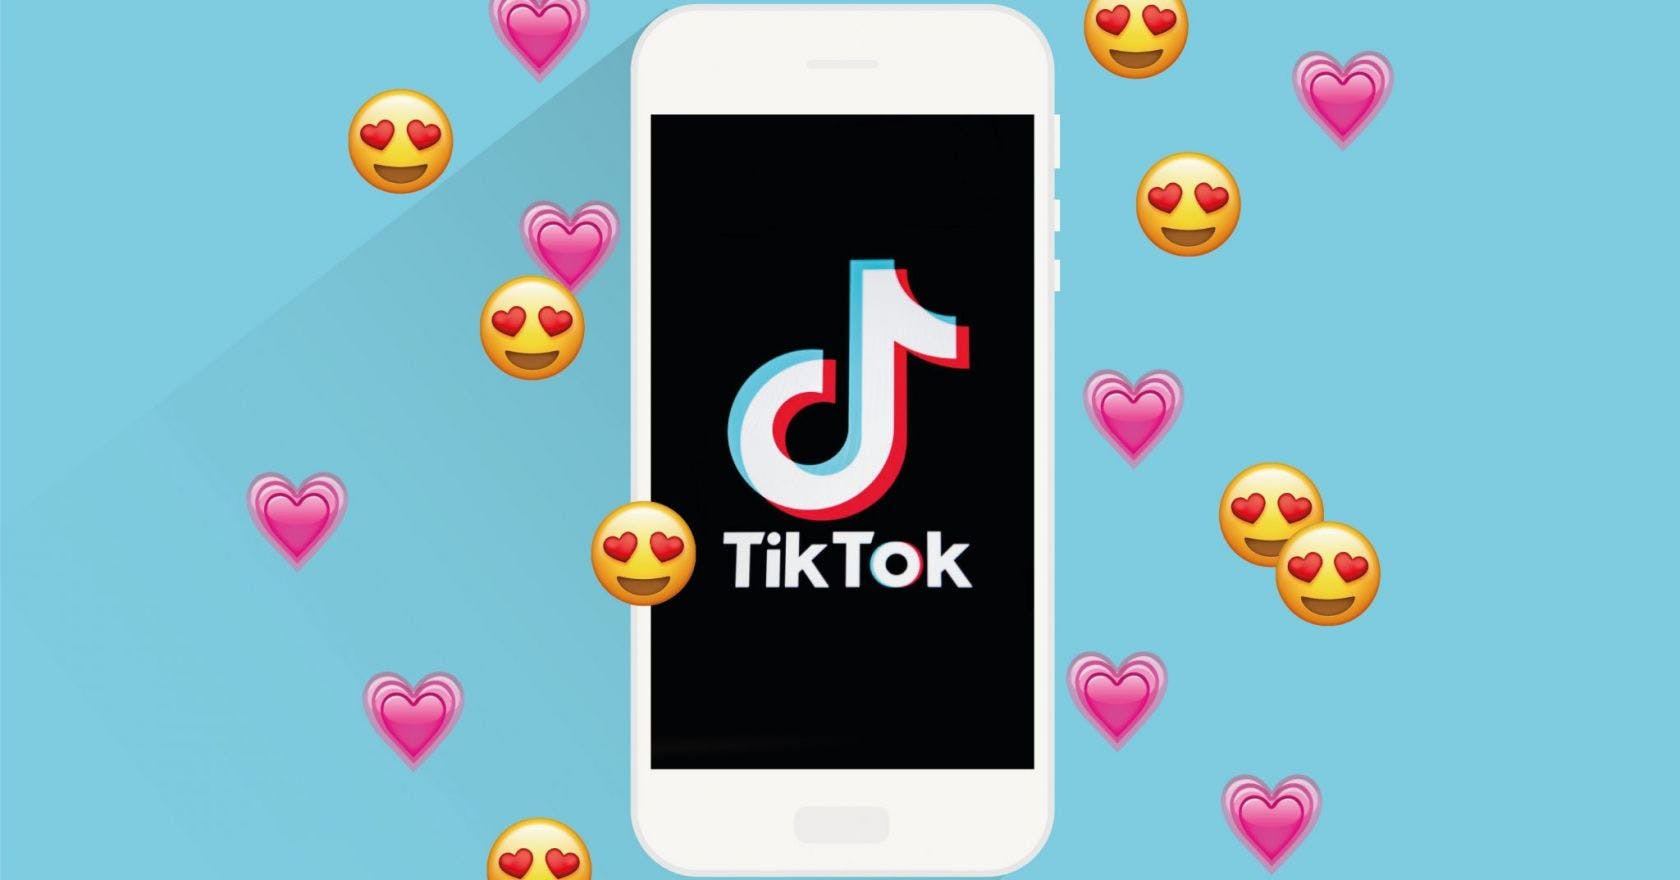 TikTok during lockdown: is it the perfect antidote to isolation?